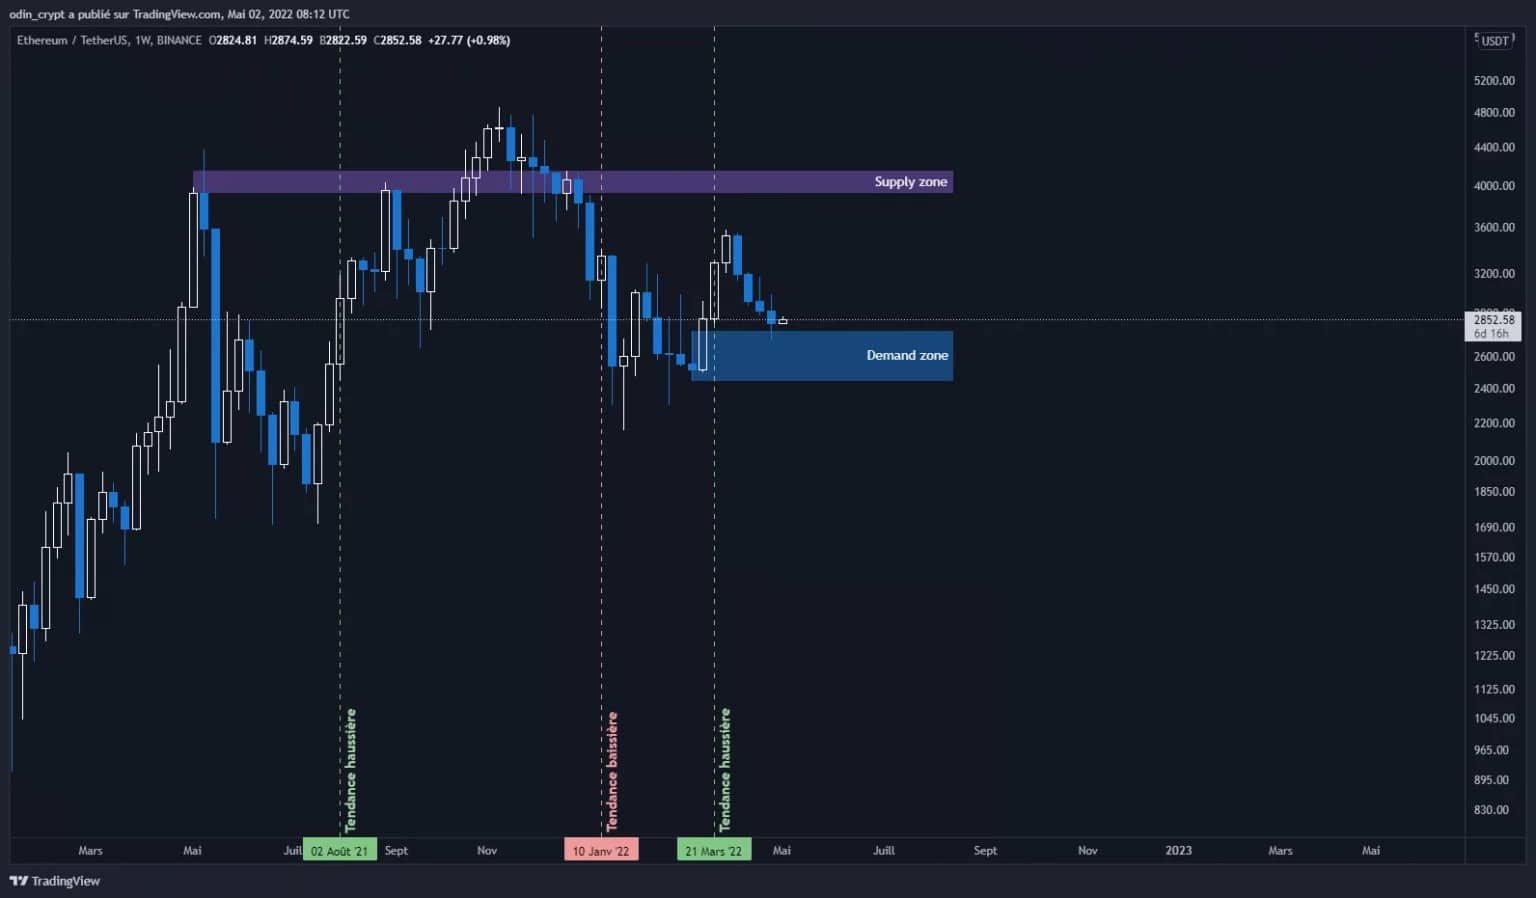 Ether (ETH) analysis in 1W